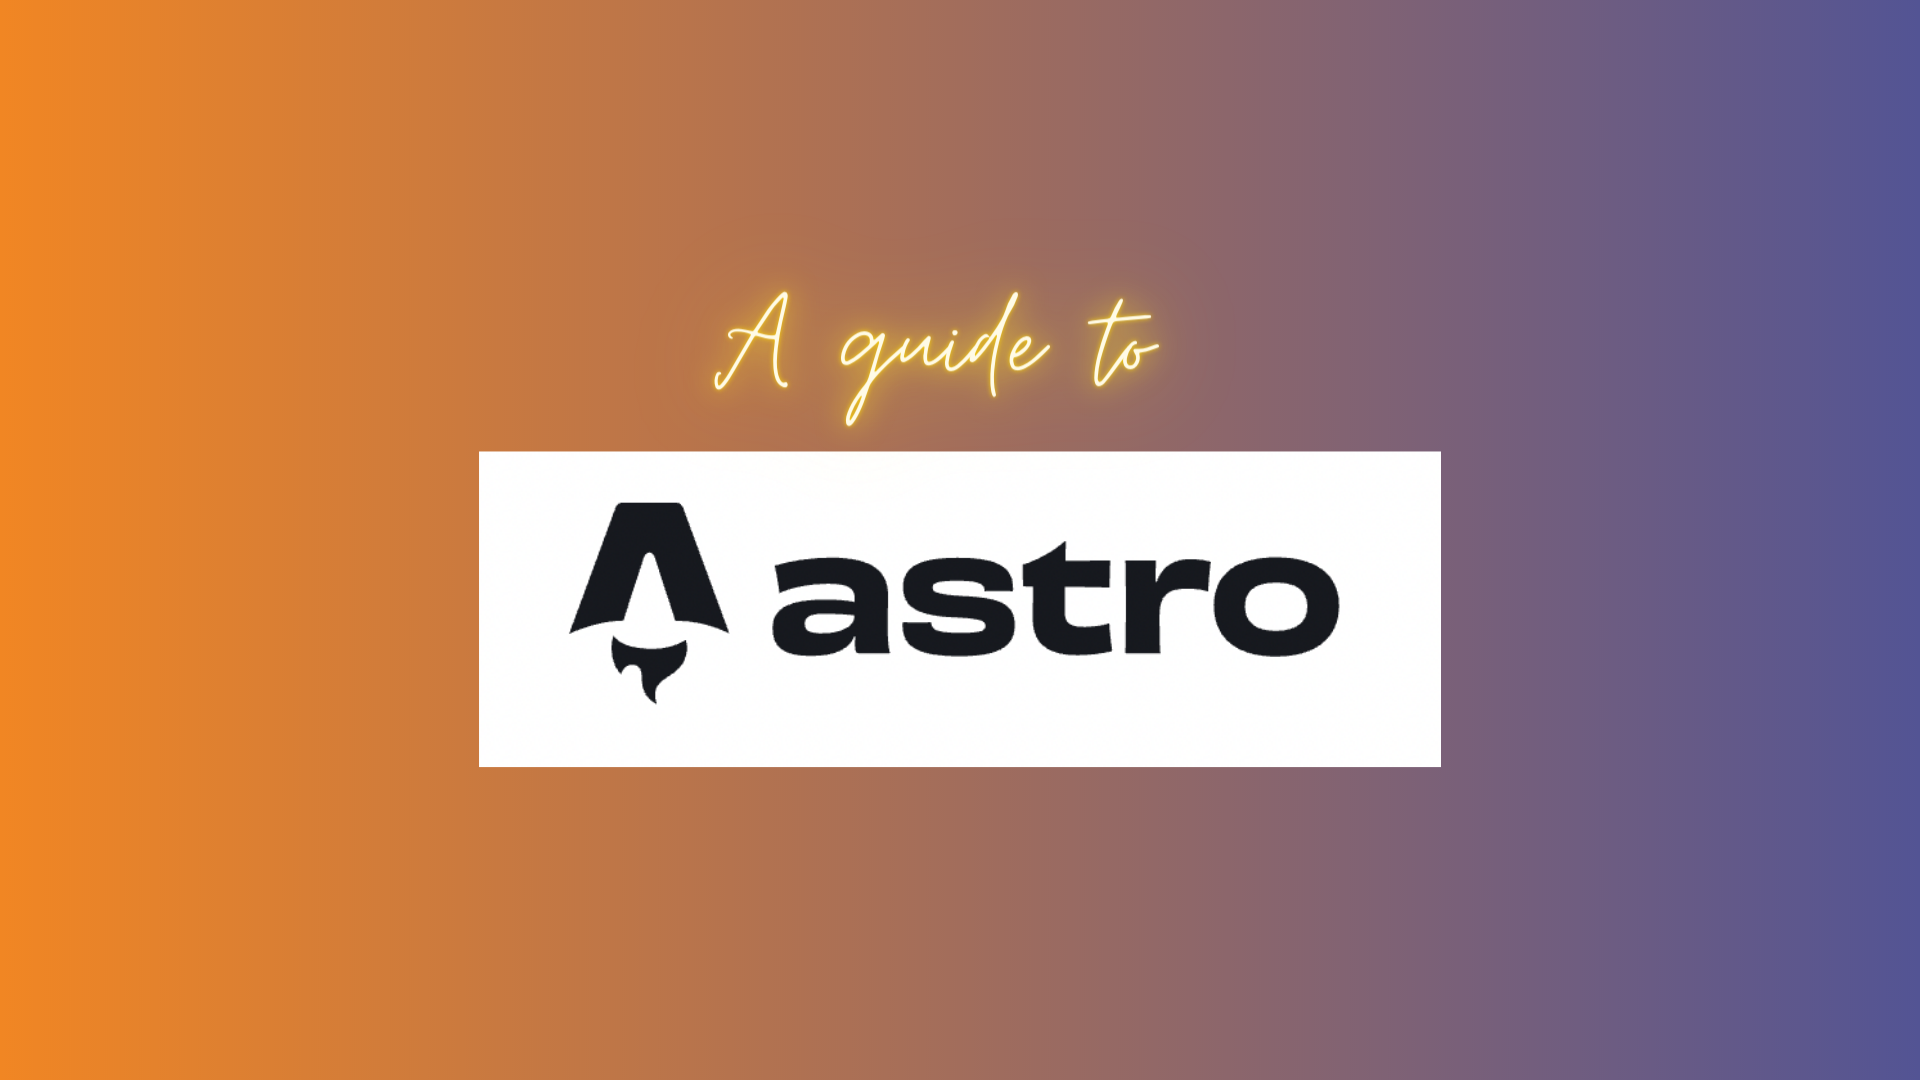 A guide to Astro with logo on a blended blue and orange background. 